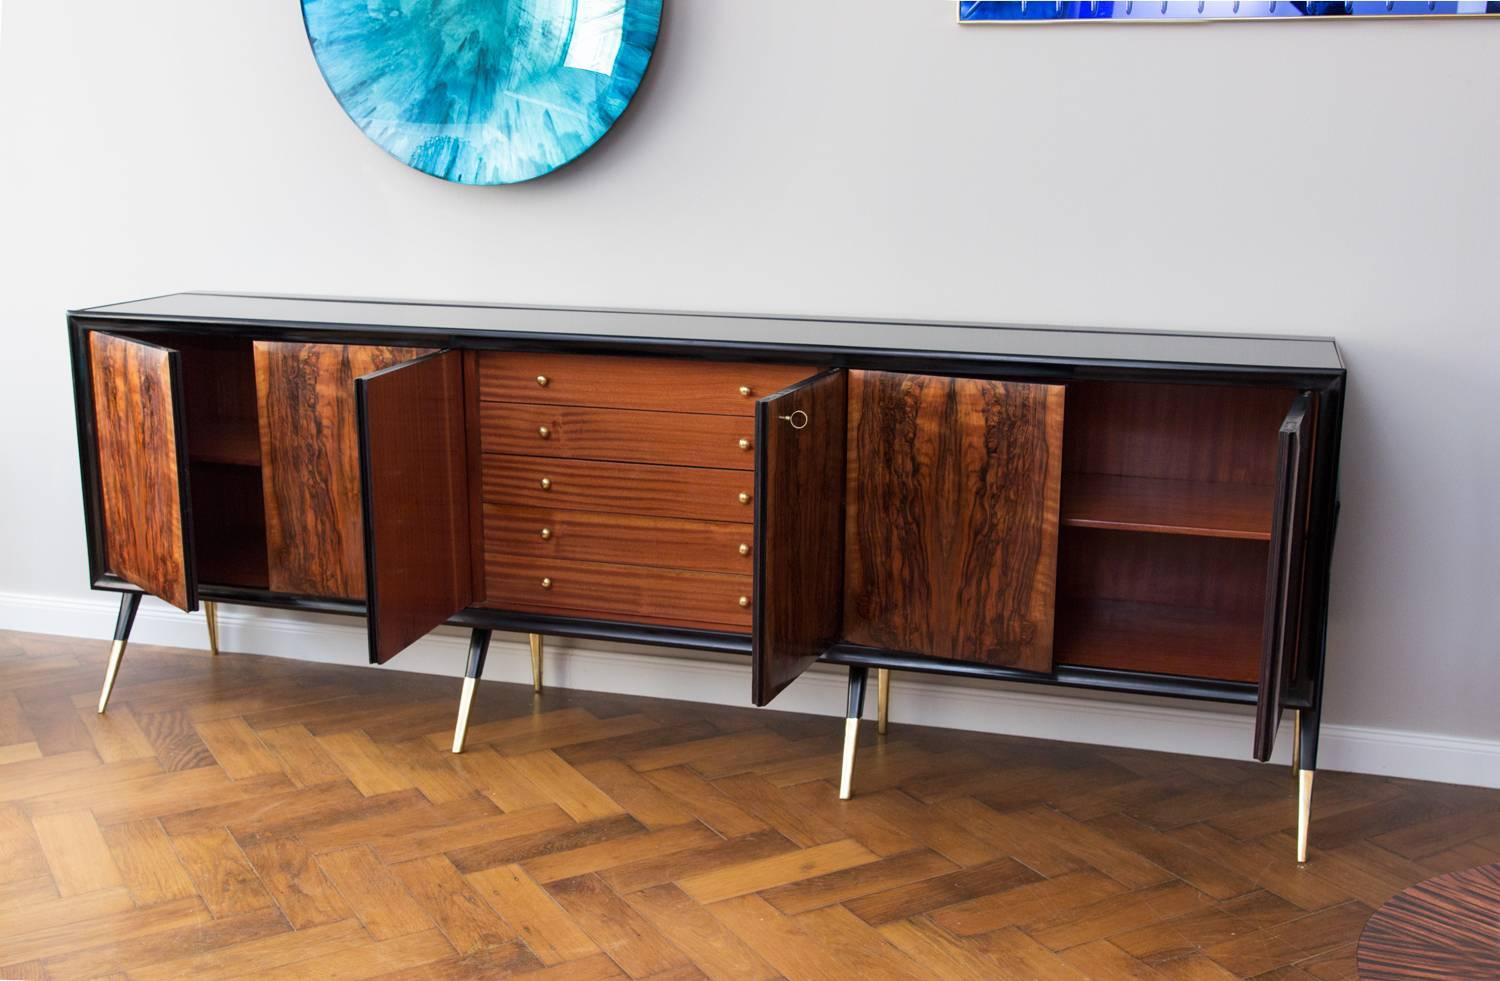 Gigant Sideboard, Italy circa 1950, elegant eight brass legs. Front doors, walnut veneered, shellac polished side legs and frame, black glass top, divided into three compartments. Middle cupboard with five drawers. the sides are veneered rosewood.